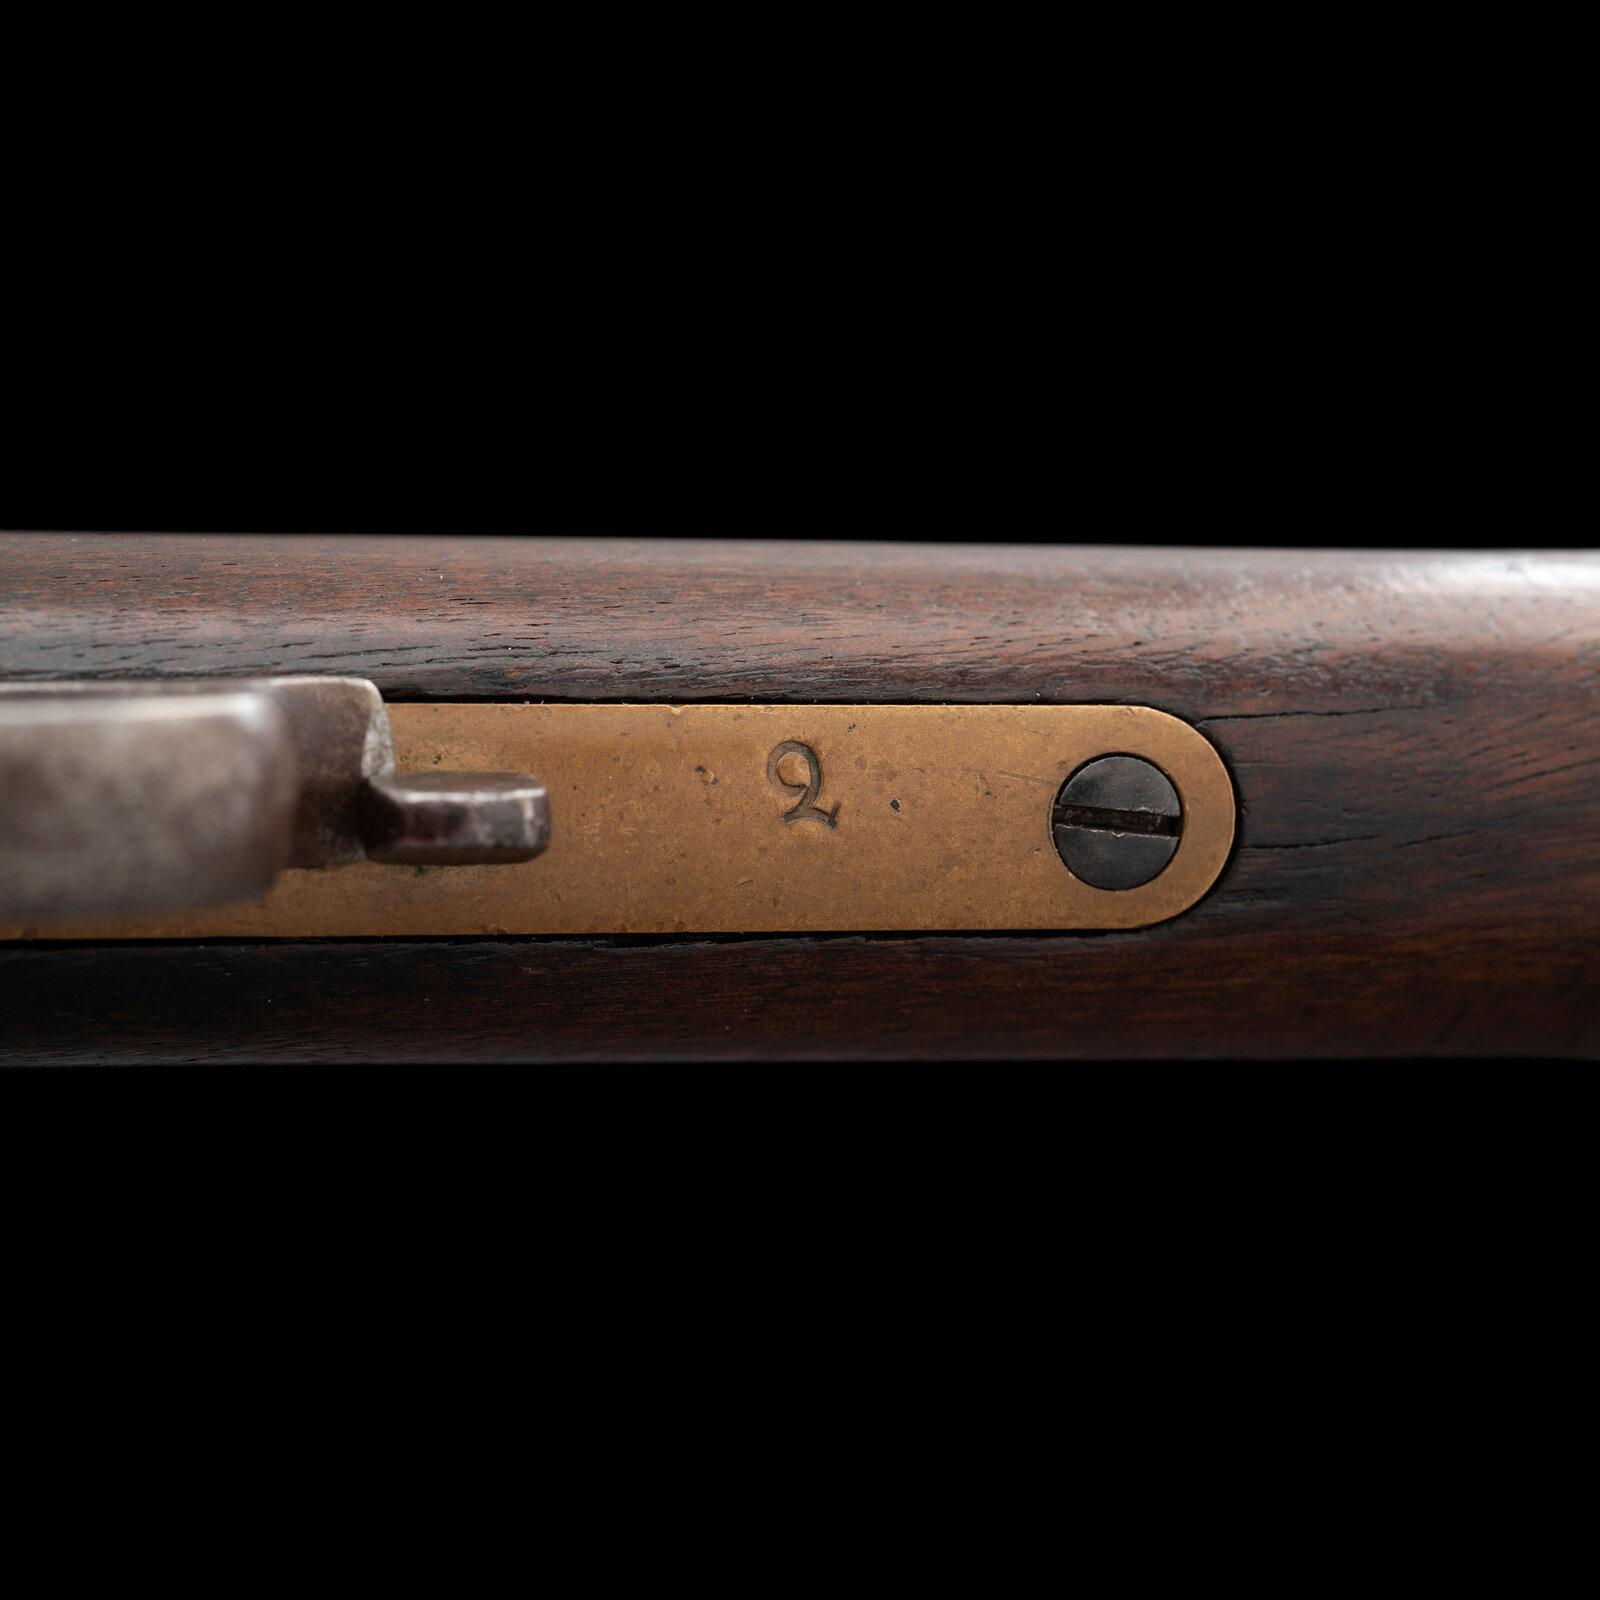 Maritally Marked 1st DC Cavalry Henry Rifle from the Collection of Charles Worman